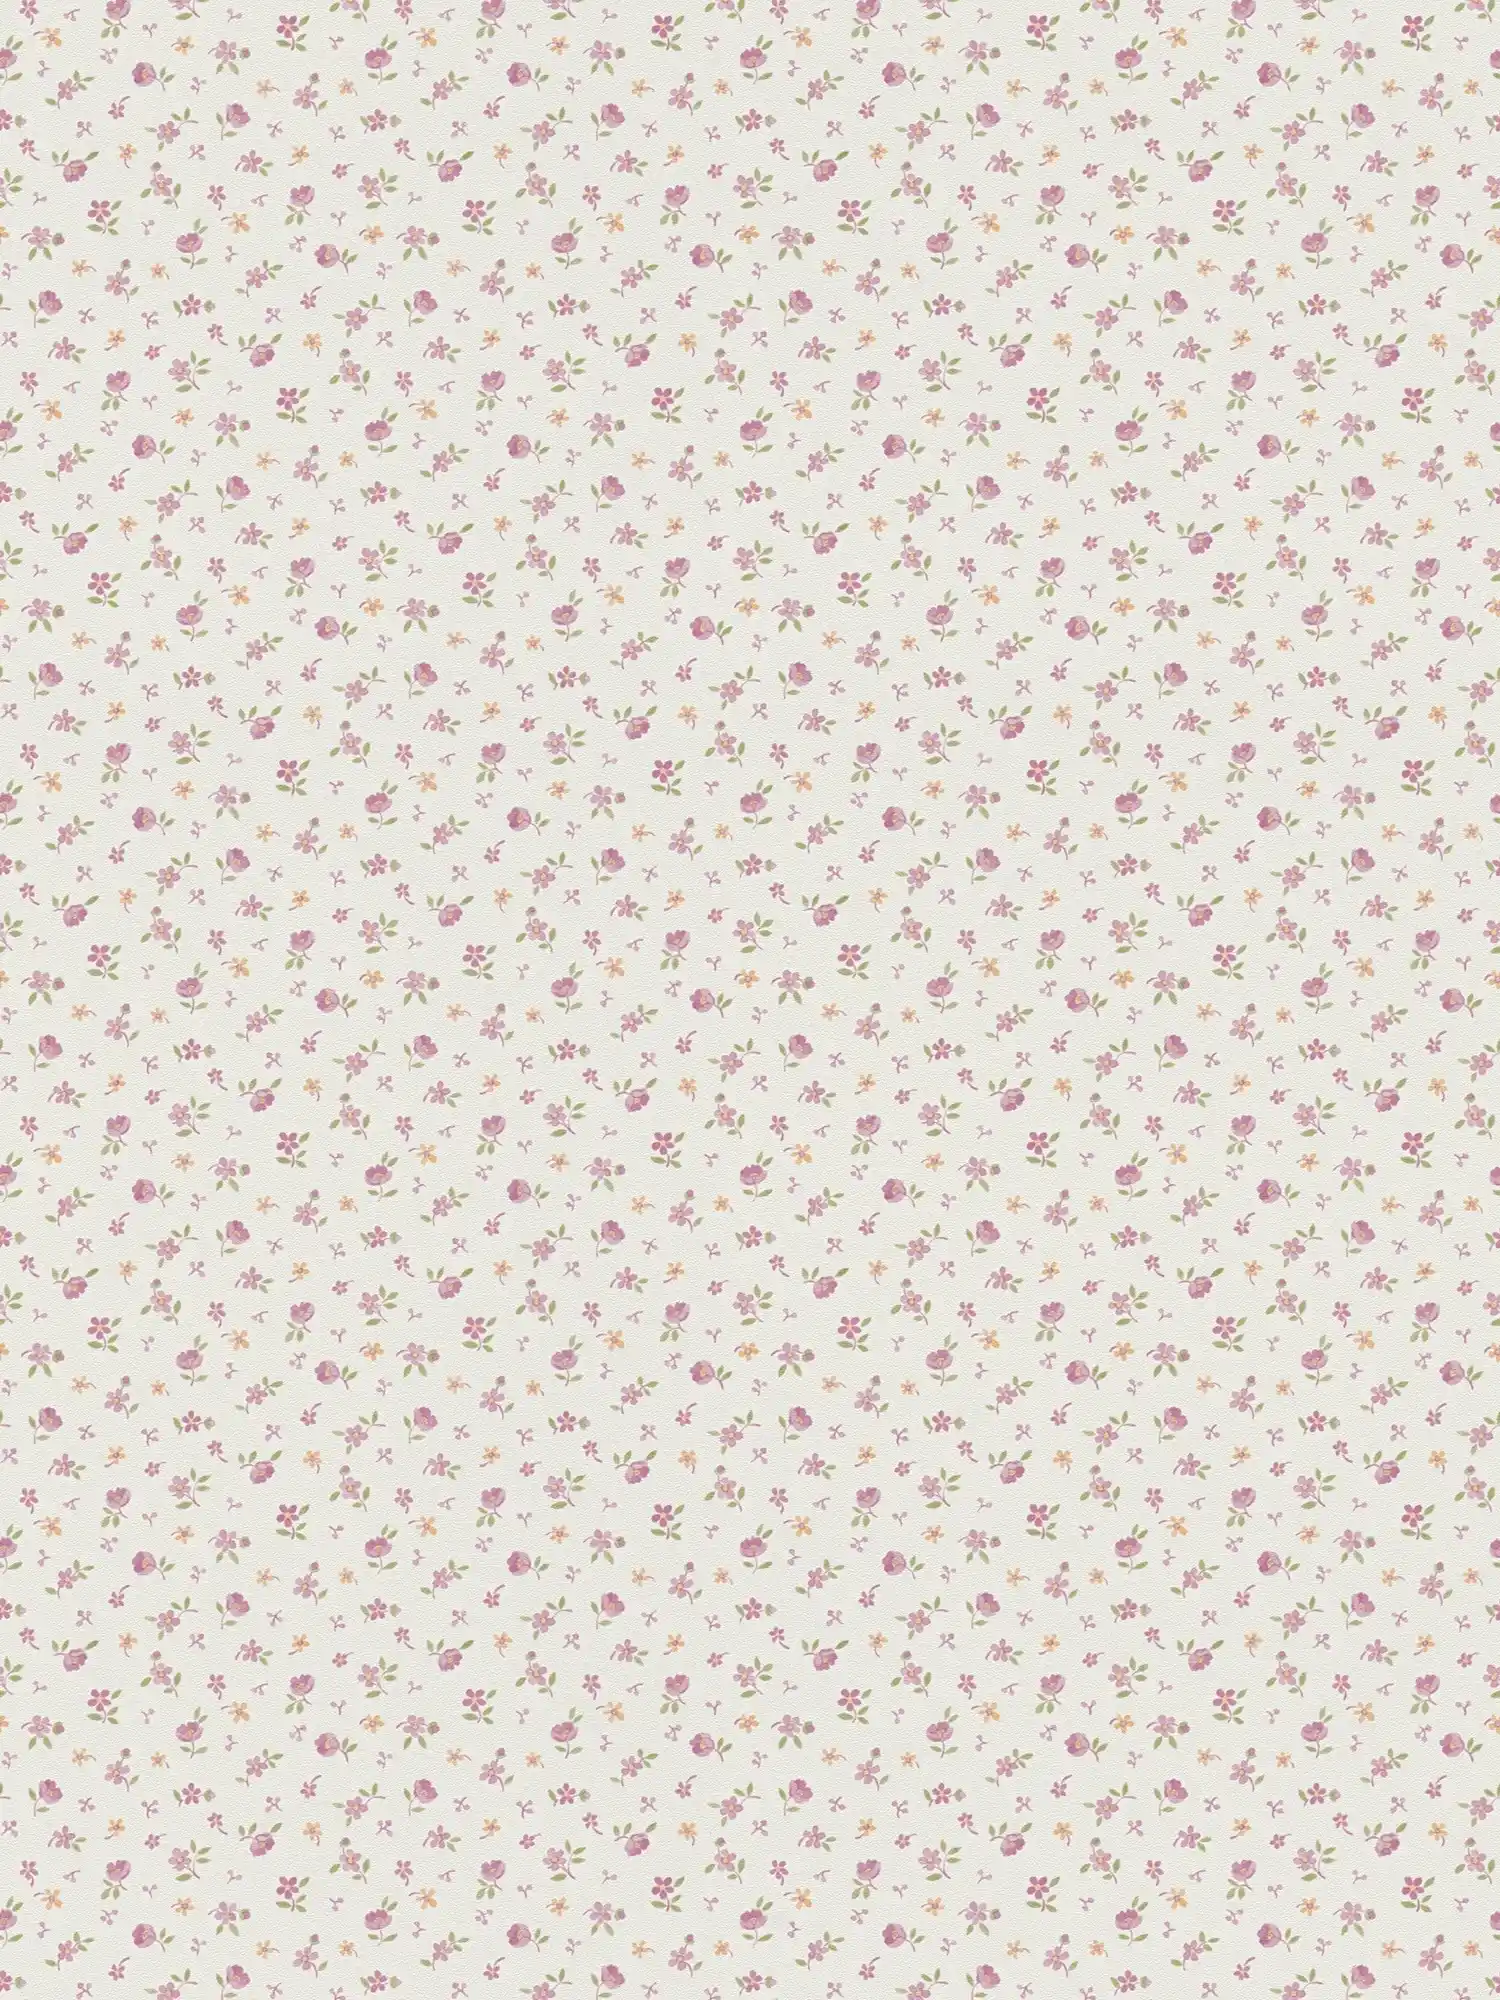 English country style floral wallpaper - pink, cream
